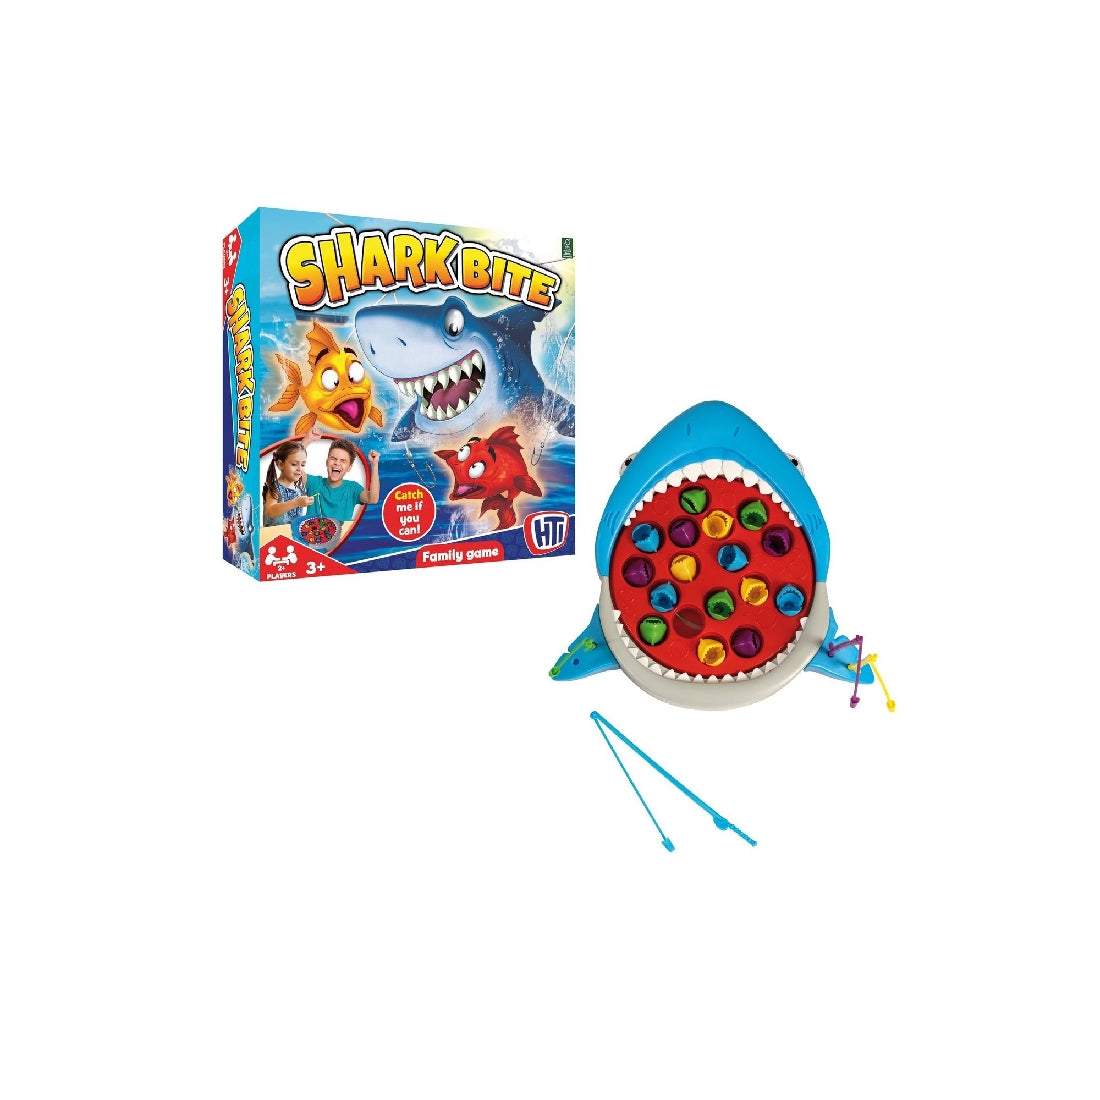 SHARKY SNAPPER FISHING FAMILY GAME